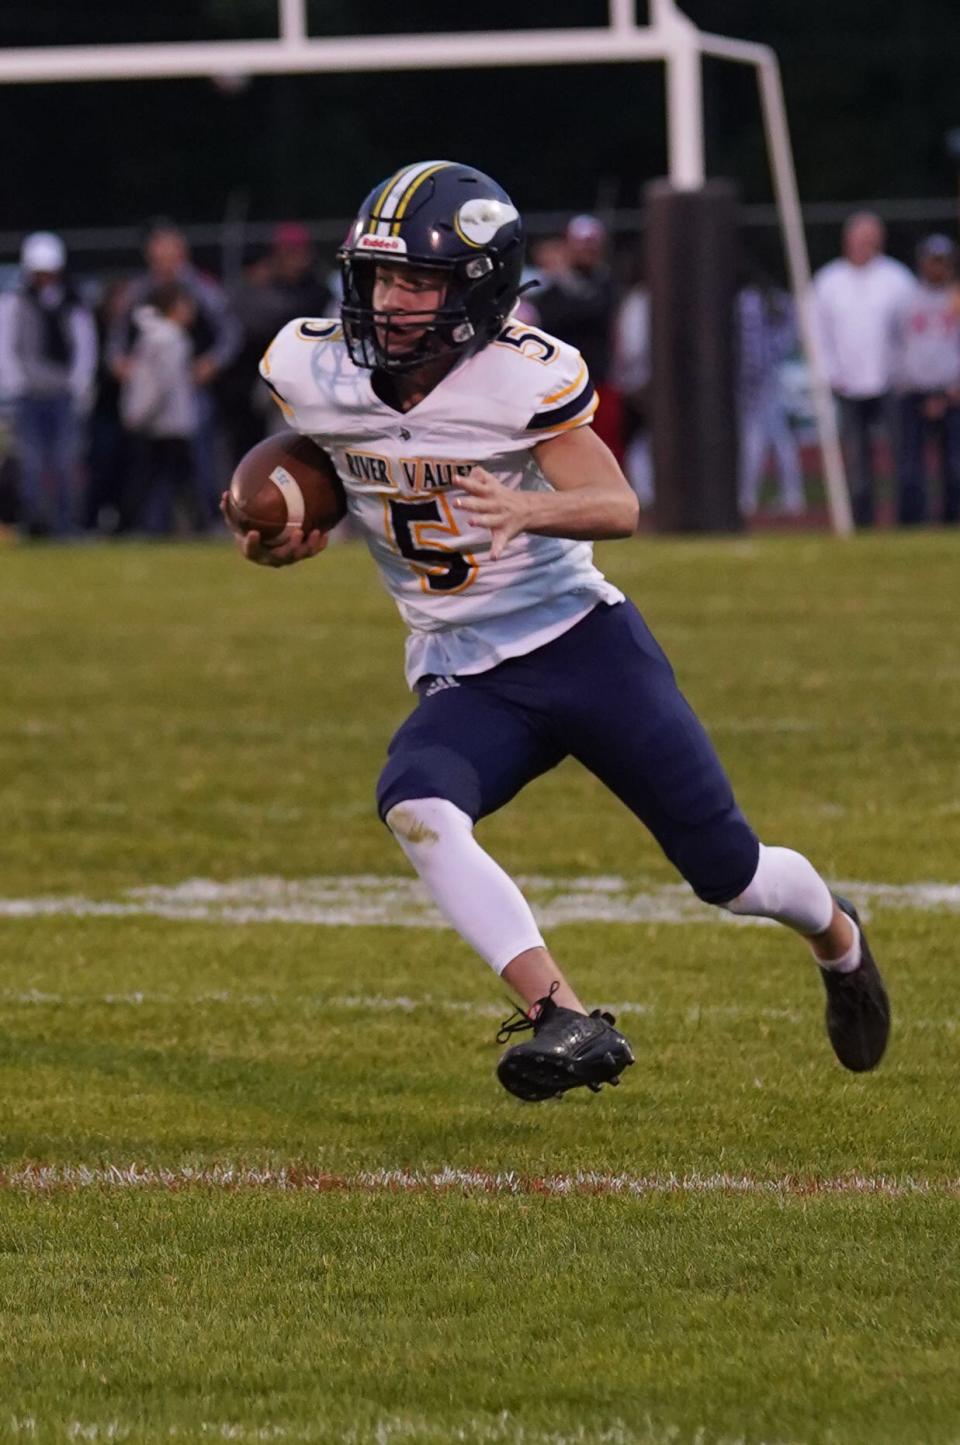 River Valley's Keyan Shidone runs after making a catch at Pleasant last football season. Shidone is one of the area's top returning receivers.